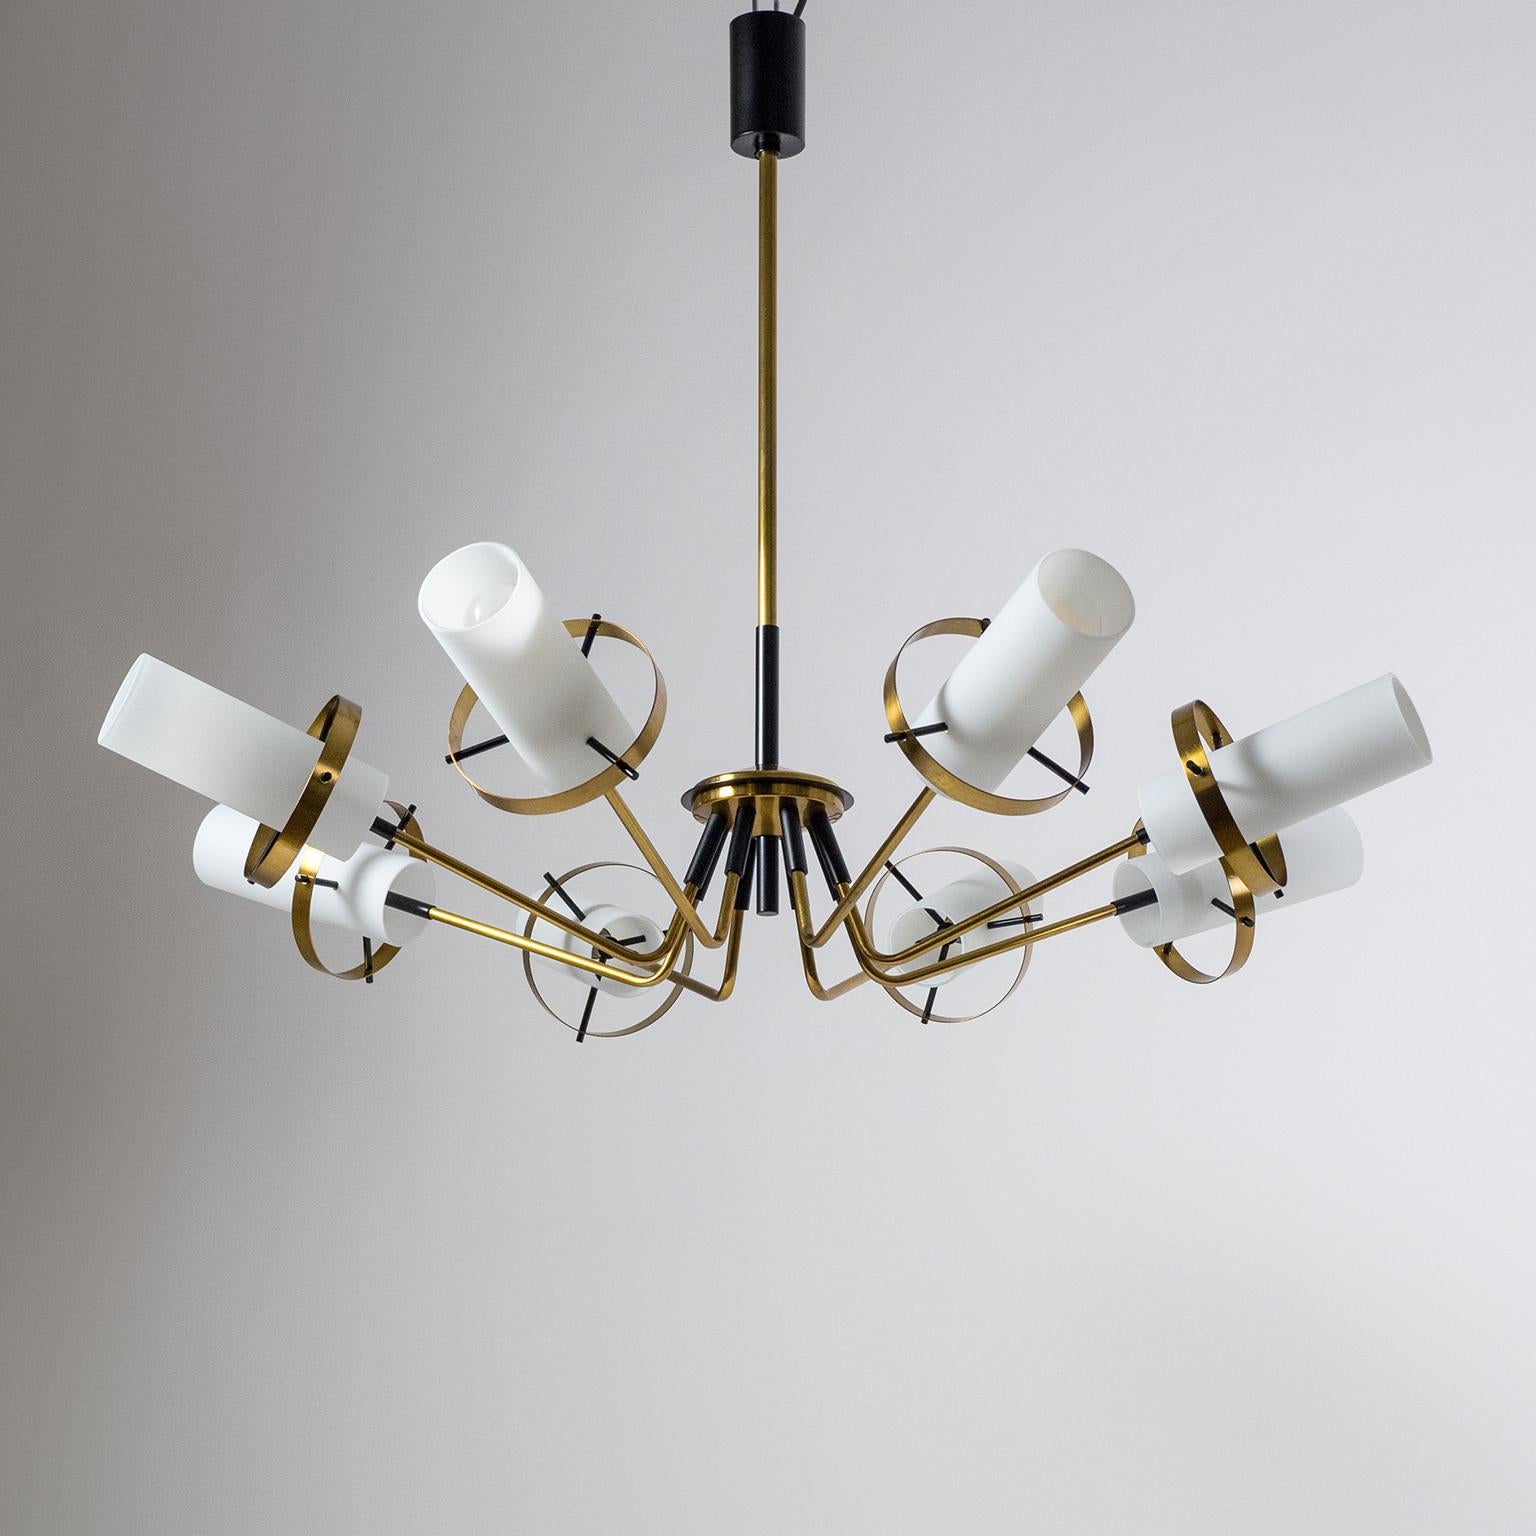 Excellent brass Sputnik chandelier attributed to Stilnovo, 1958. The hardware is made entirely of brass, partially lacquered in black. Each of the eight-arm has a 